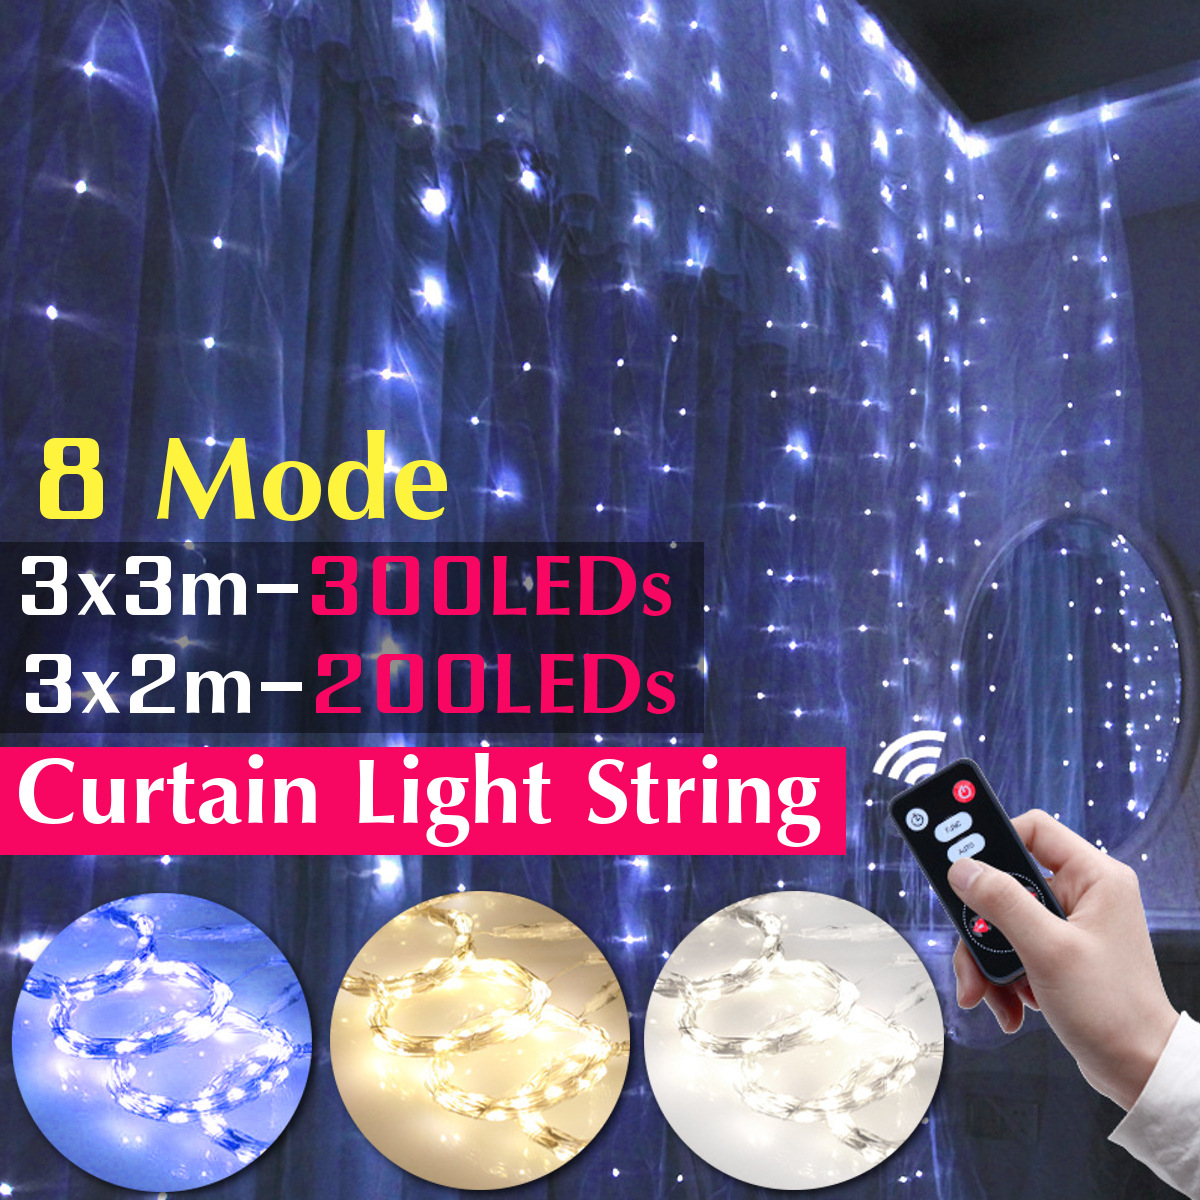 USB-5V-RC-Remote-Control-200300LED-Curtain-Lamp-String-Fairy-Lights-Indoor-Outdoor-Garden-Party-Wedd-1773781-1